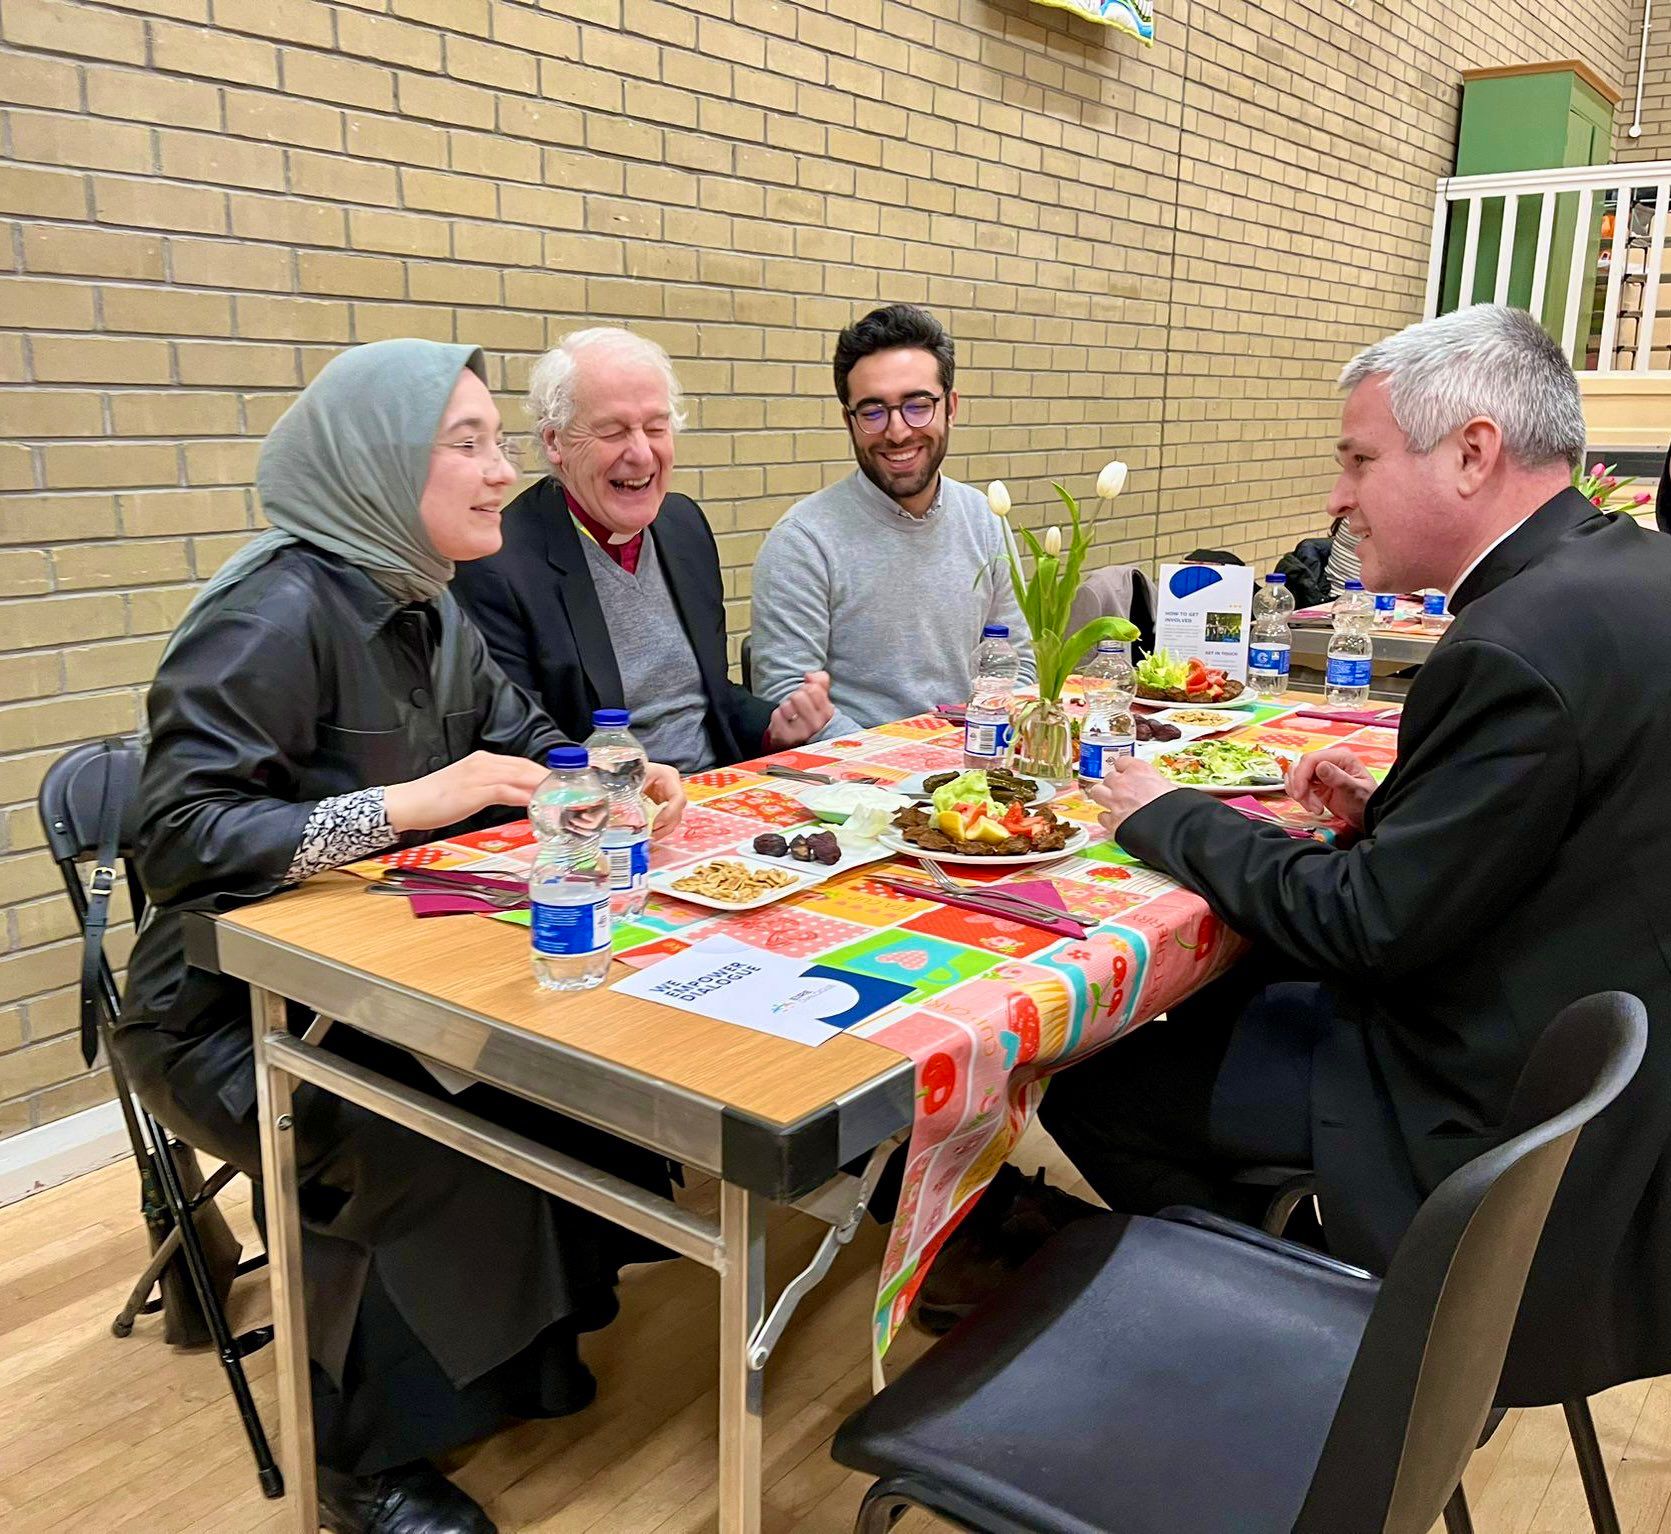 Enjoying Iftar with the Archbishop and the Vicar.